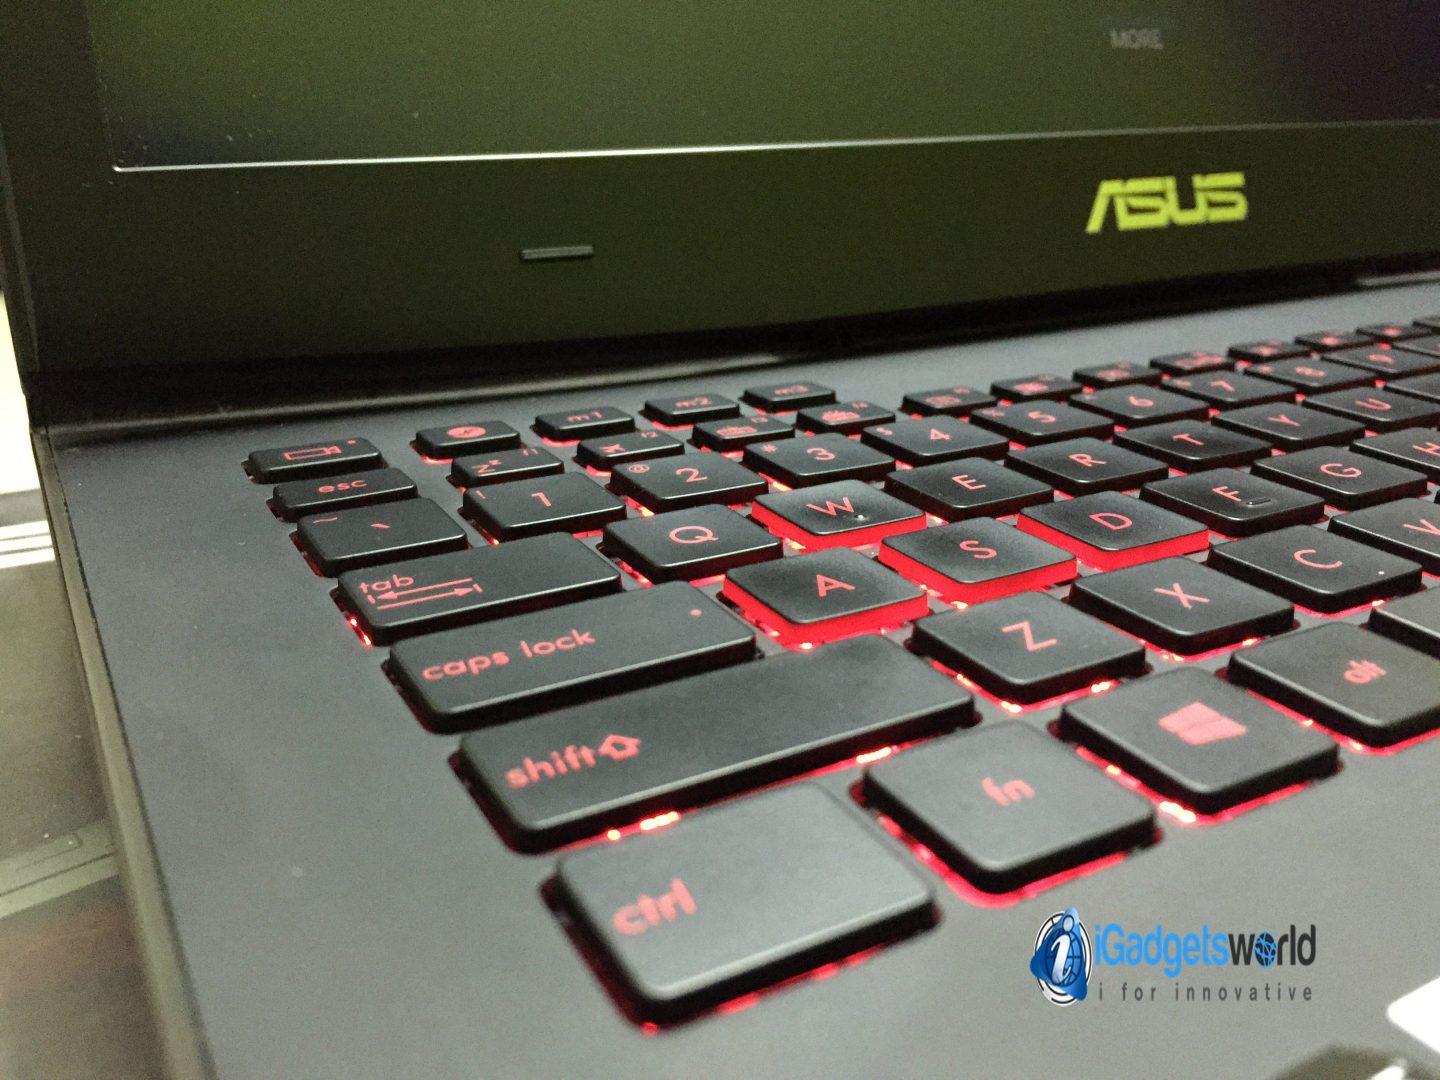 Asus ROG G751J Review: A Slightly Overpriced Ultra High-End Gaming Laptop - 22